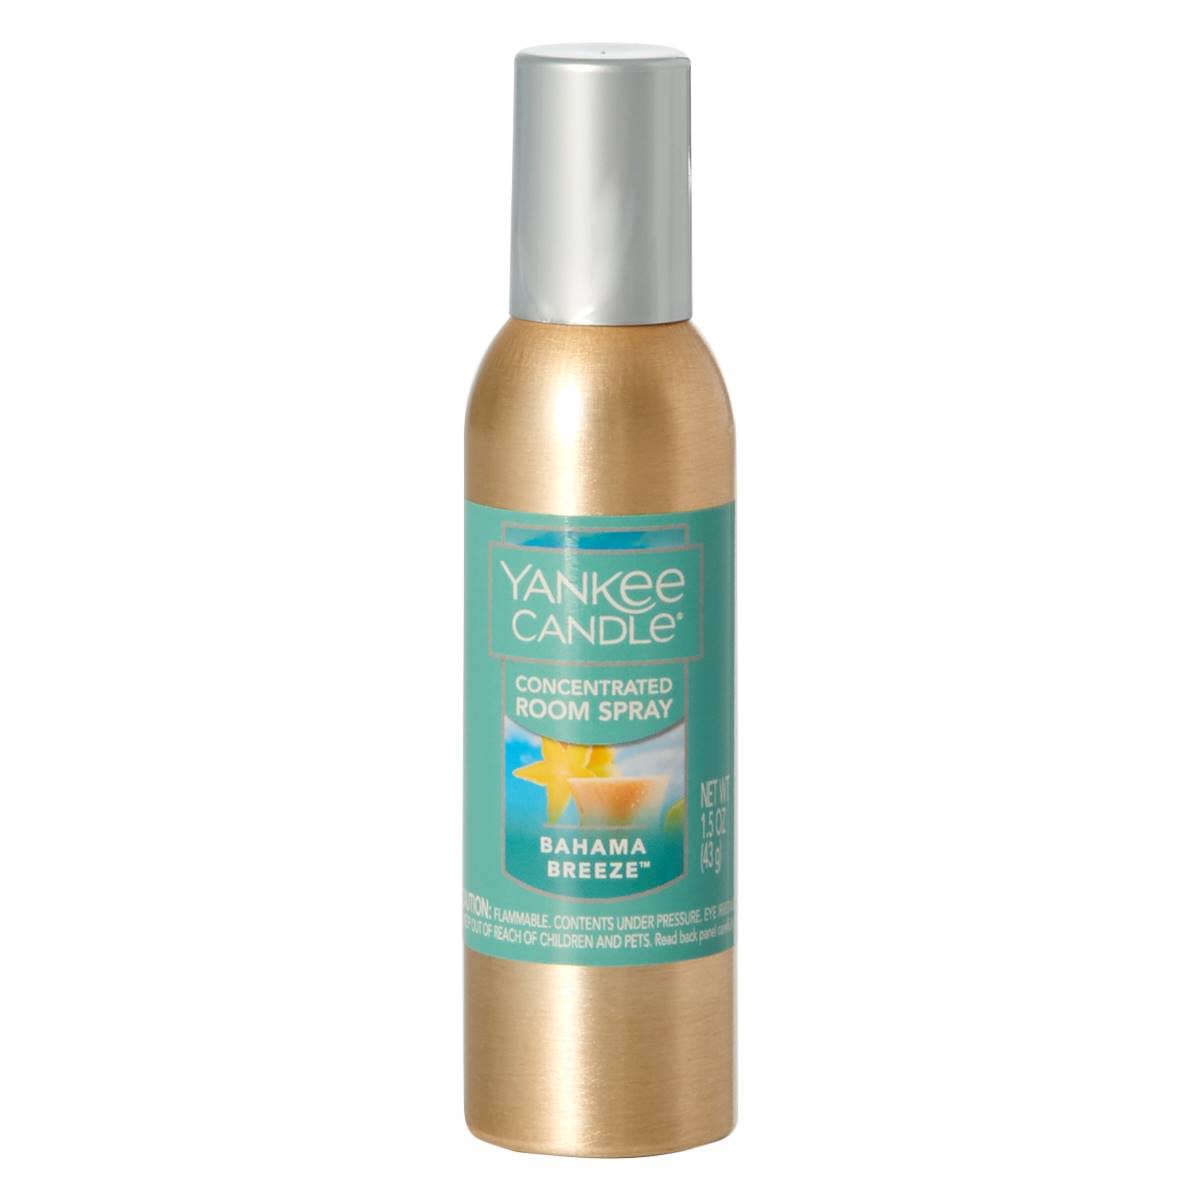 Yankee Candle Bahama Breeze Concentrated Room Spray - 1.5oz